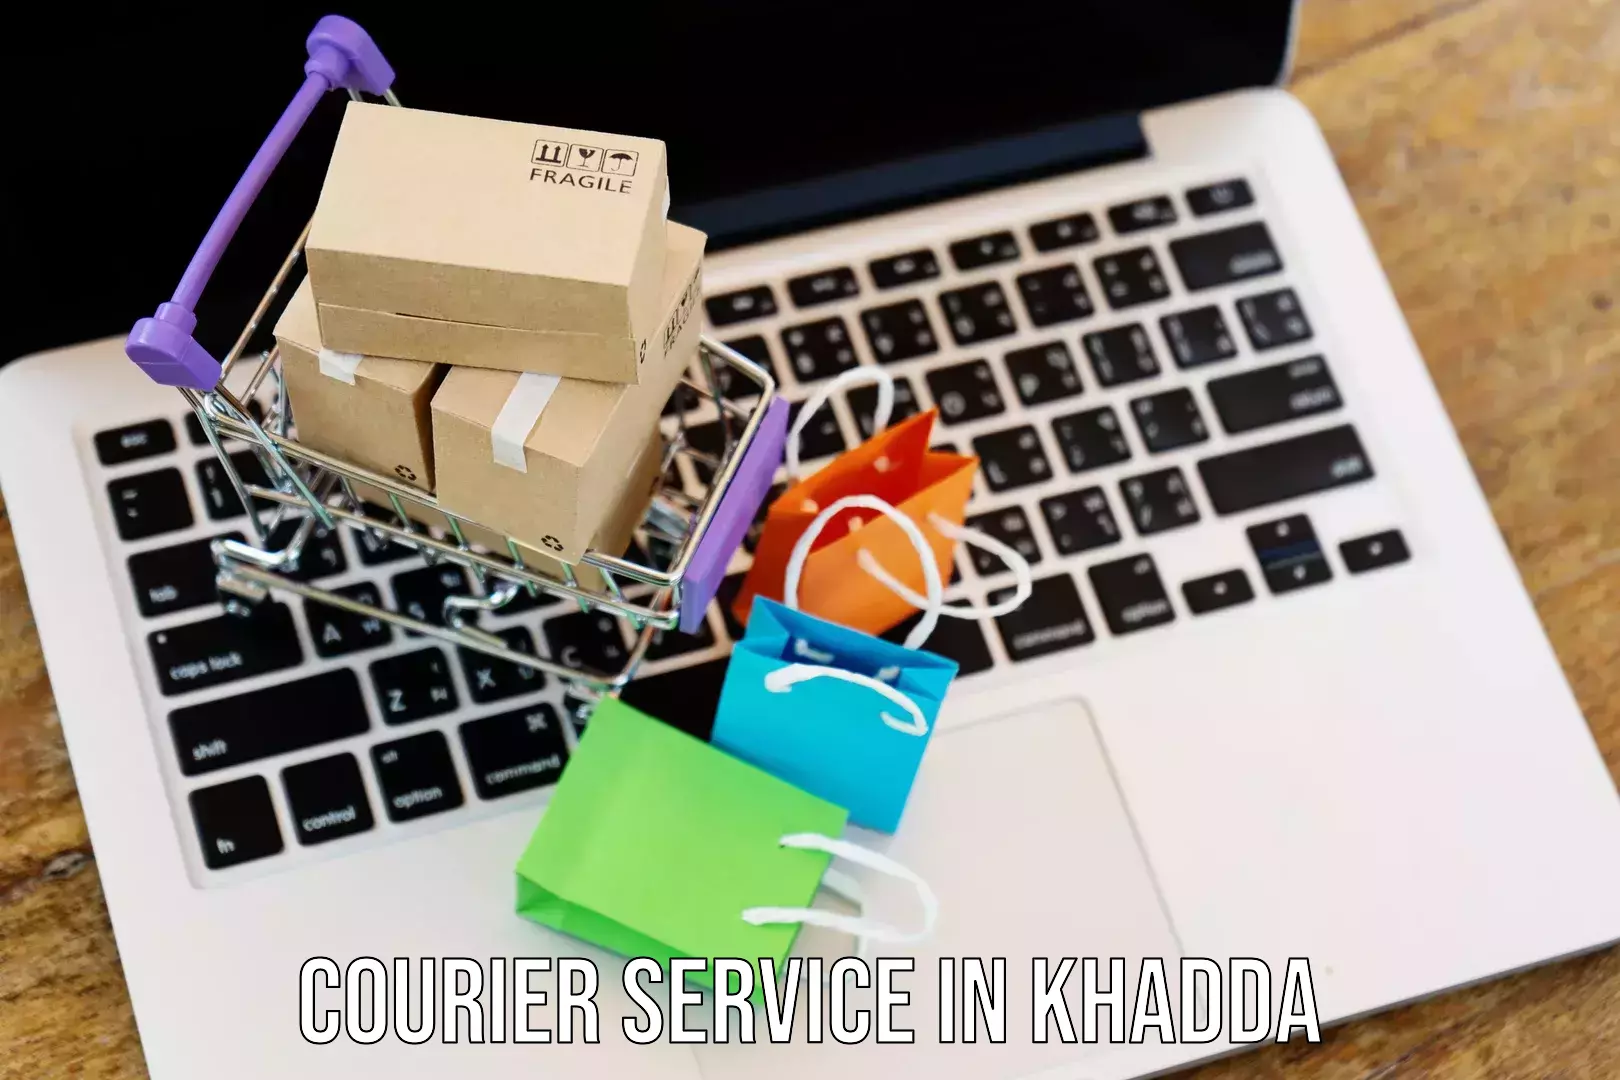 Professional parcel services in Khadda